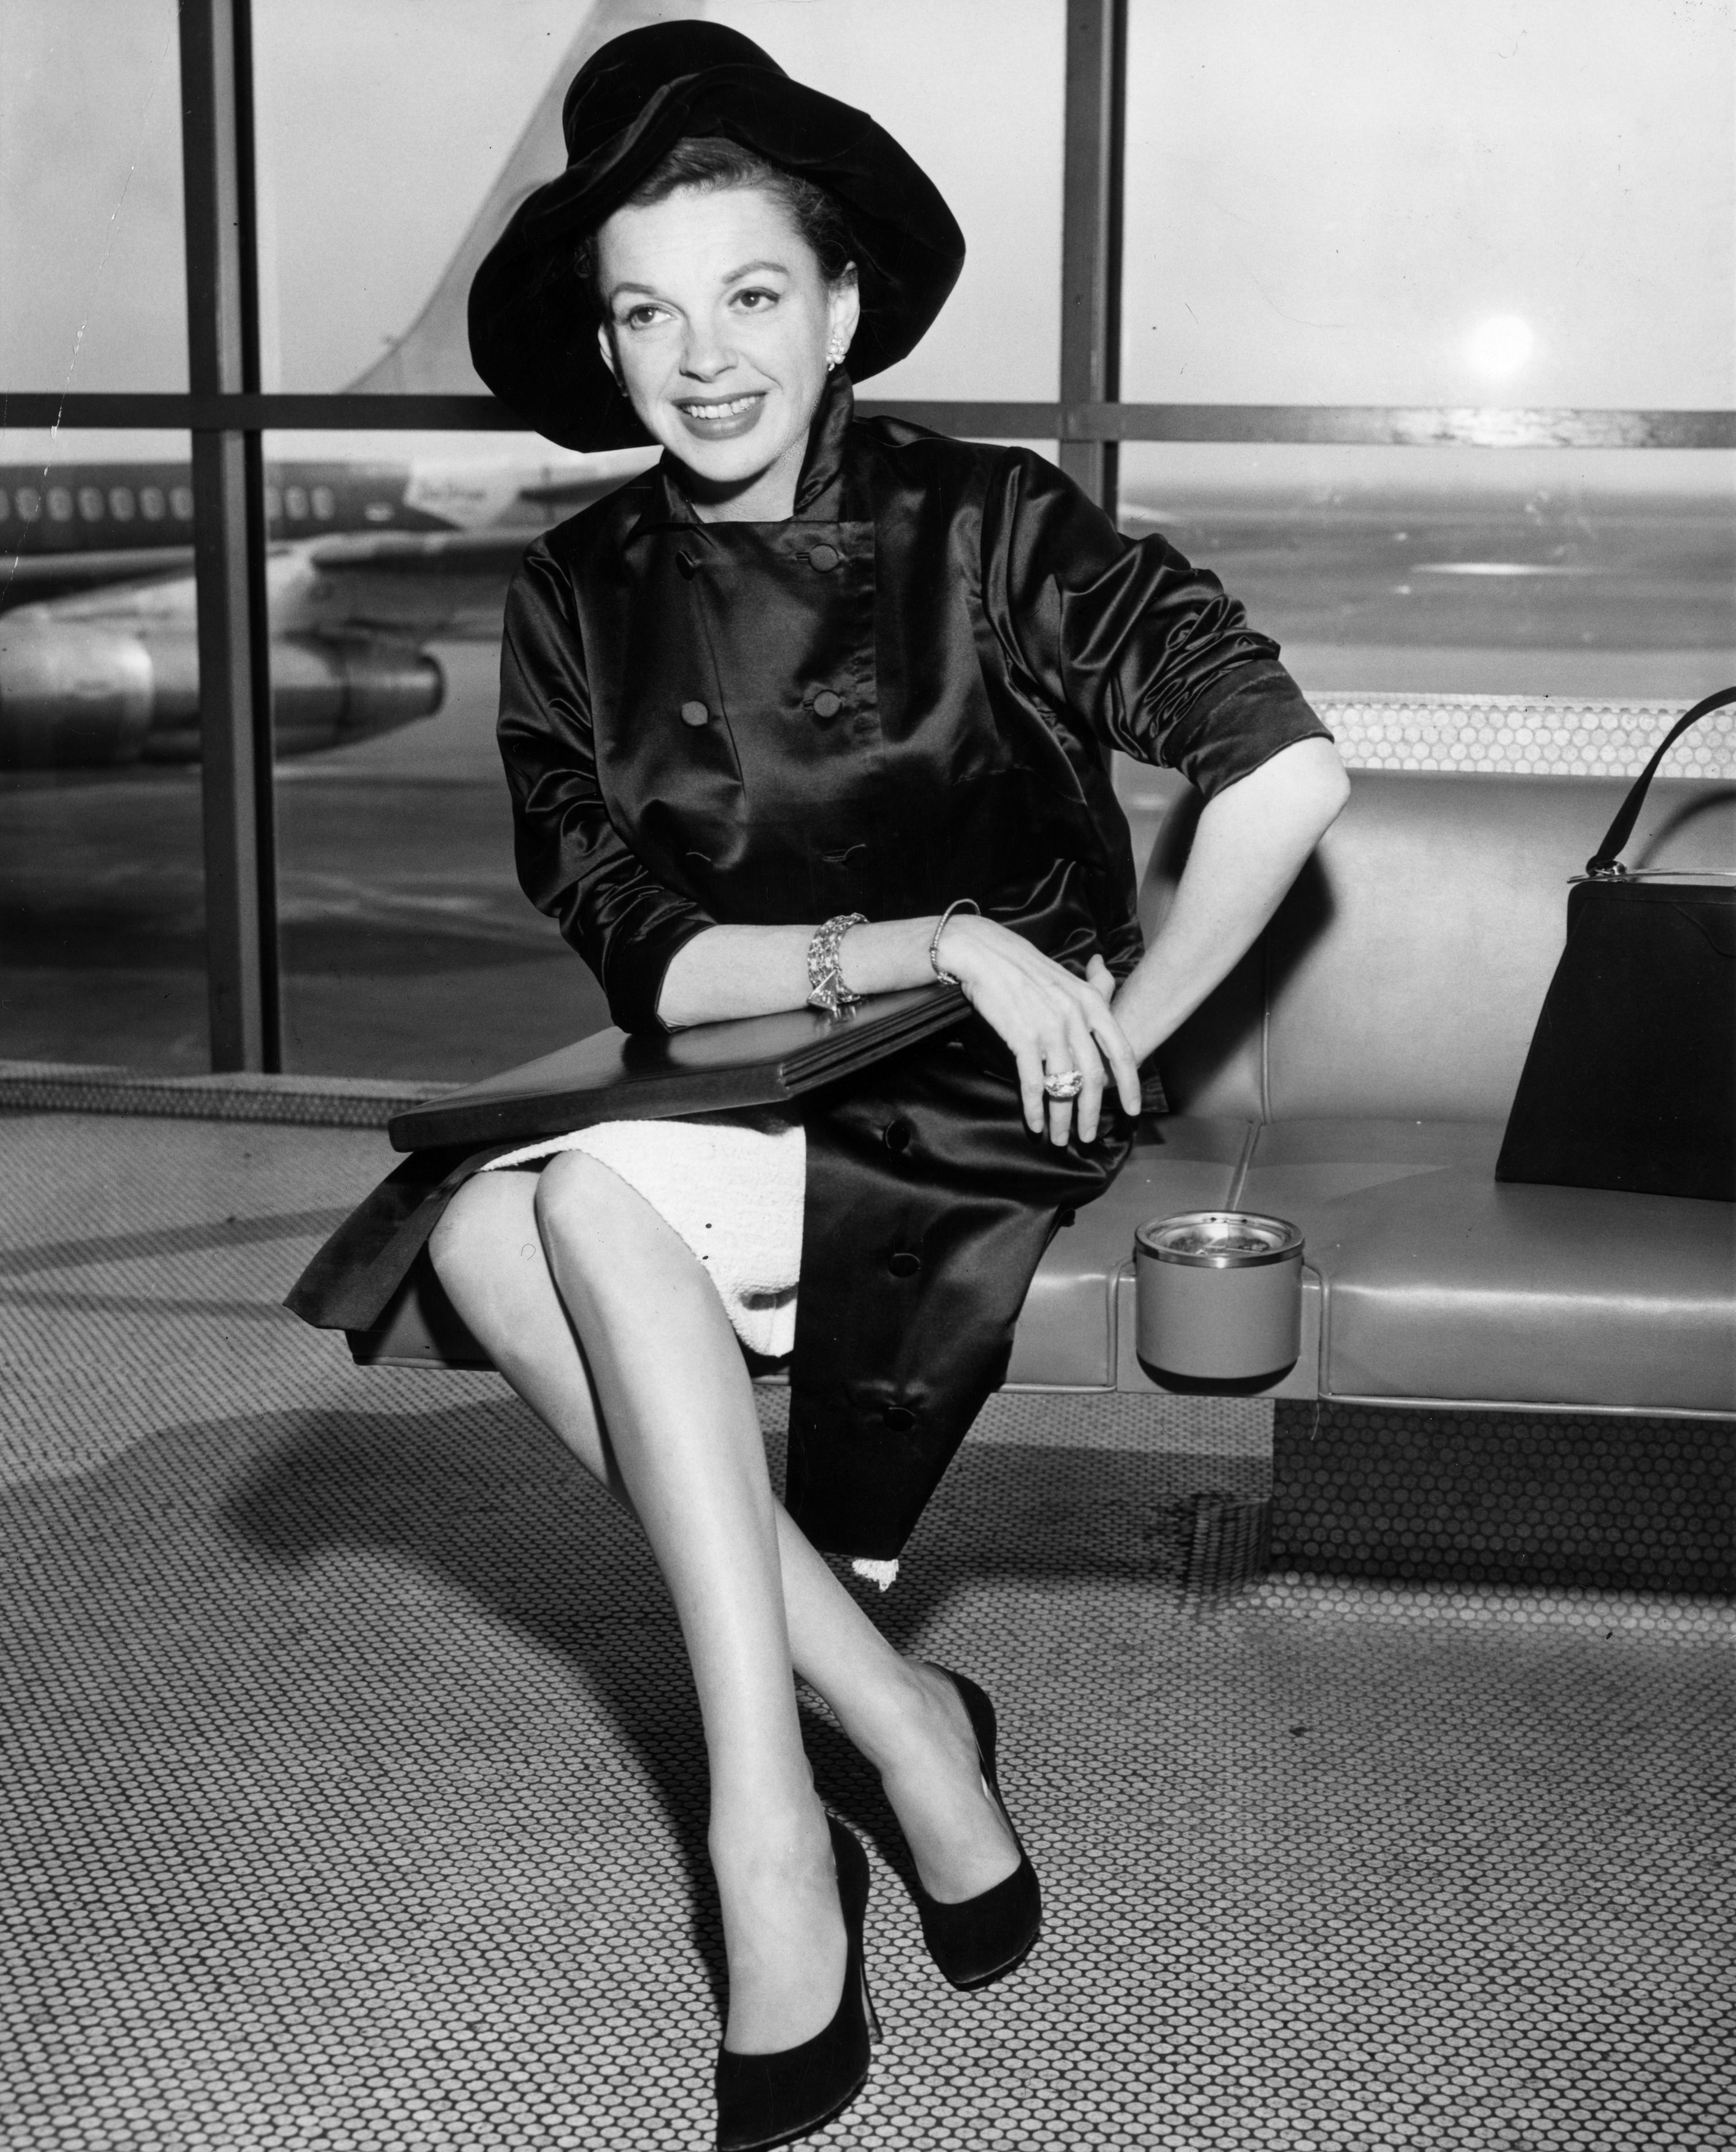 Judy Garland (1922 - 1969) photographed at an airport, circa 1955. | Source: Getty Images